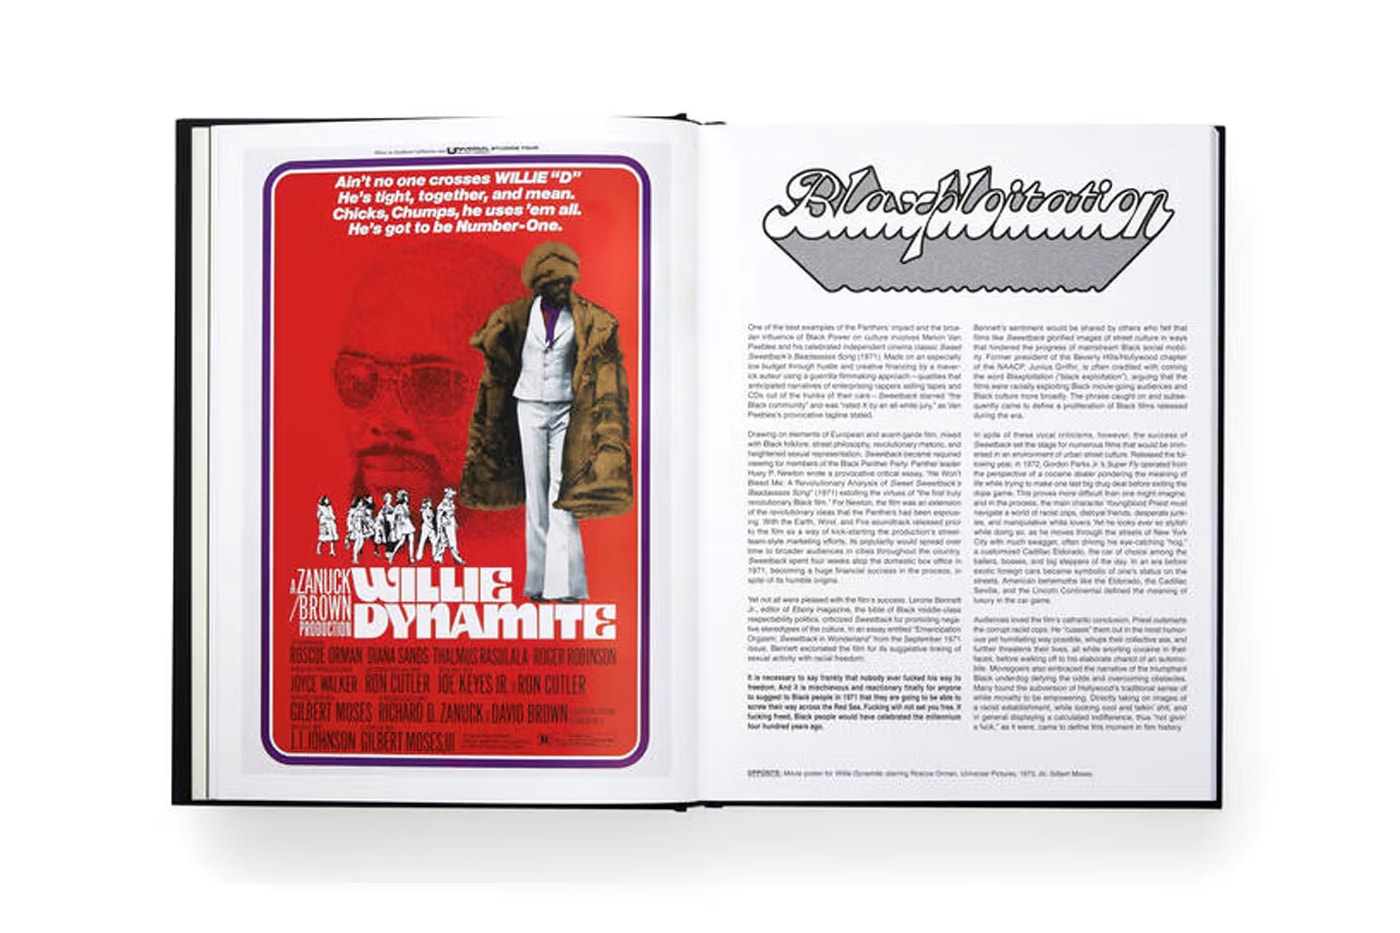 Phaidon Unveils 'Rapper's Deluxe: How Hip Hop Made The World' Rapper's Deluxe: How Hip Hop Made The World, written by Dr. Todd Boyd – a.k.a. The Notorious PhD price images coffee table book link price website store